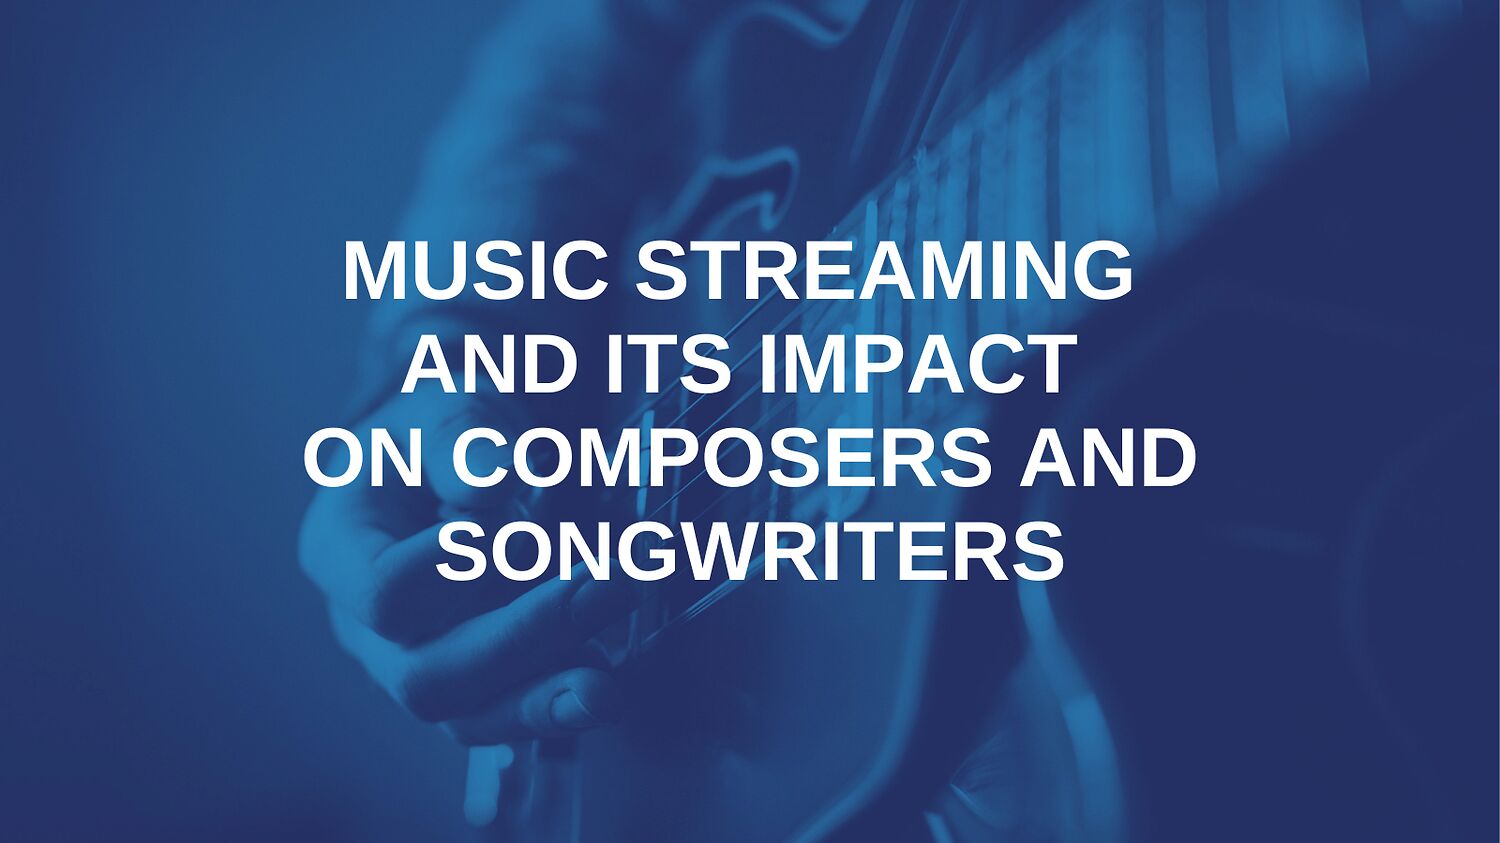 ECSA White Paper on Music Streaming: “Music streaming and its impact on composers and songwriters – Why we should fix streaming now”